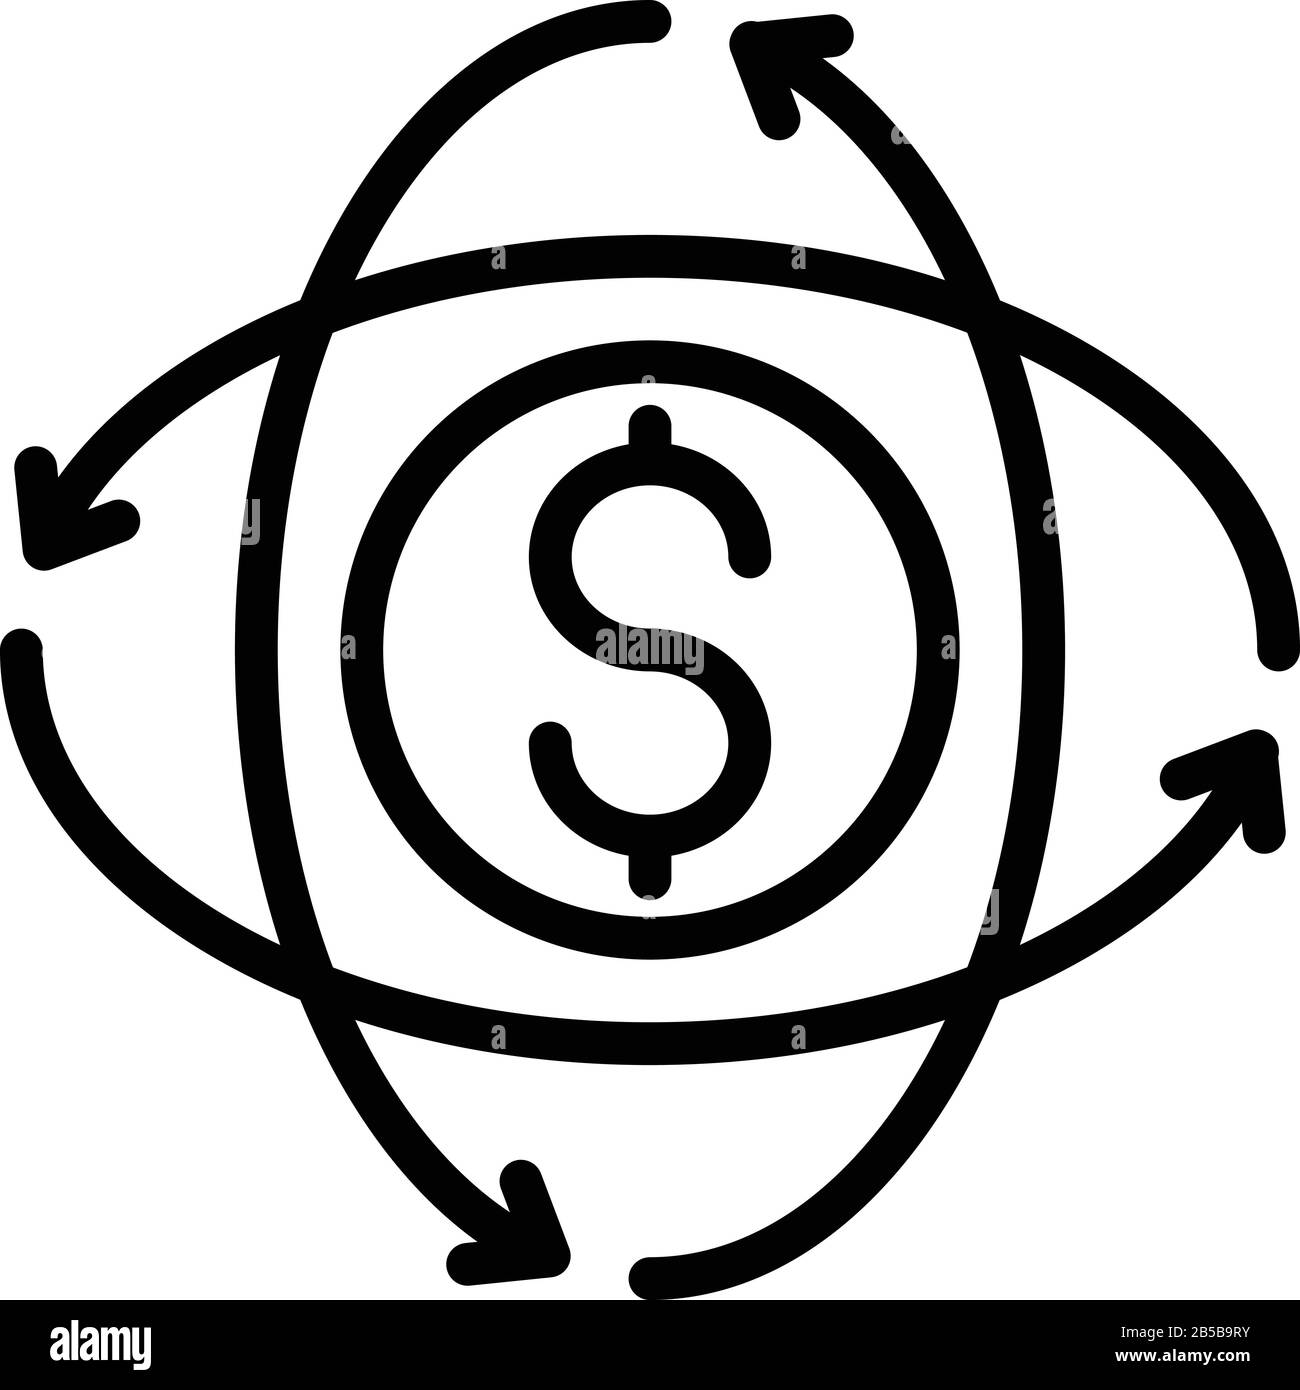 Crowdfunding platform icon, outline style Stock Vector